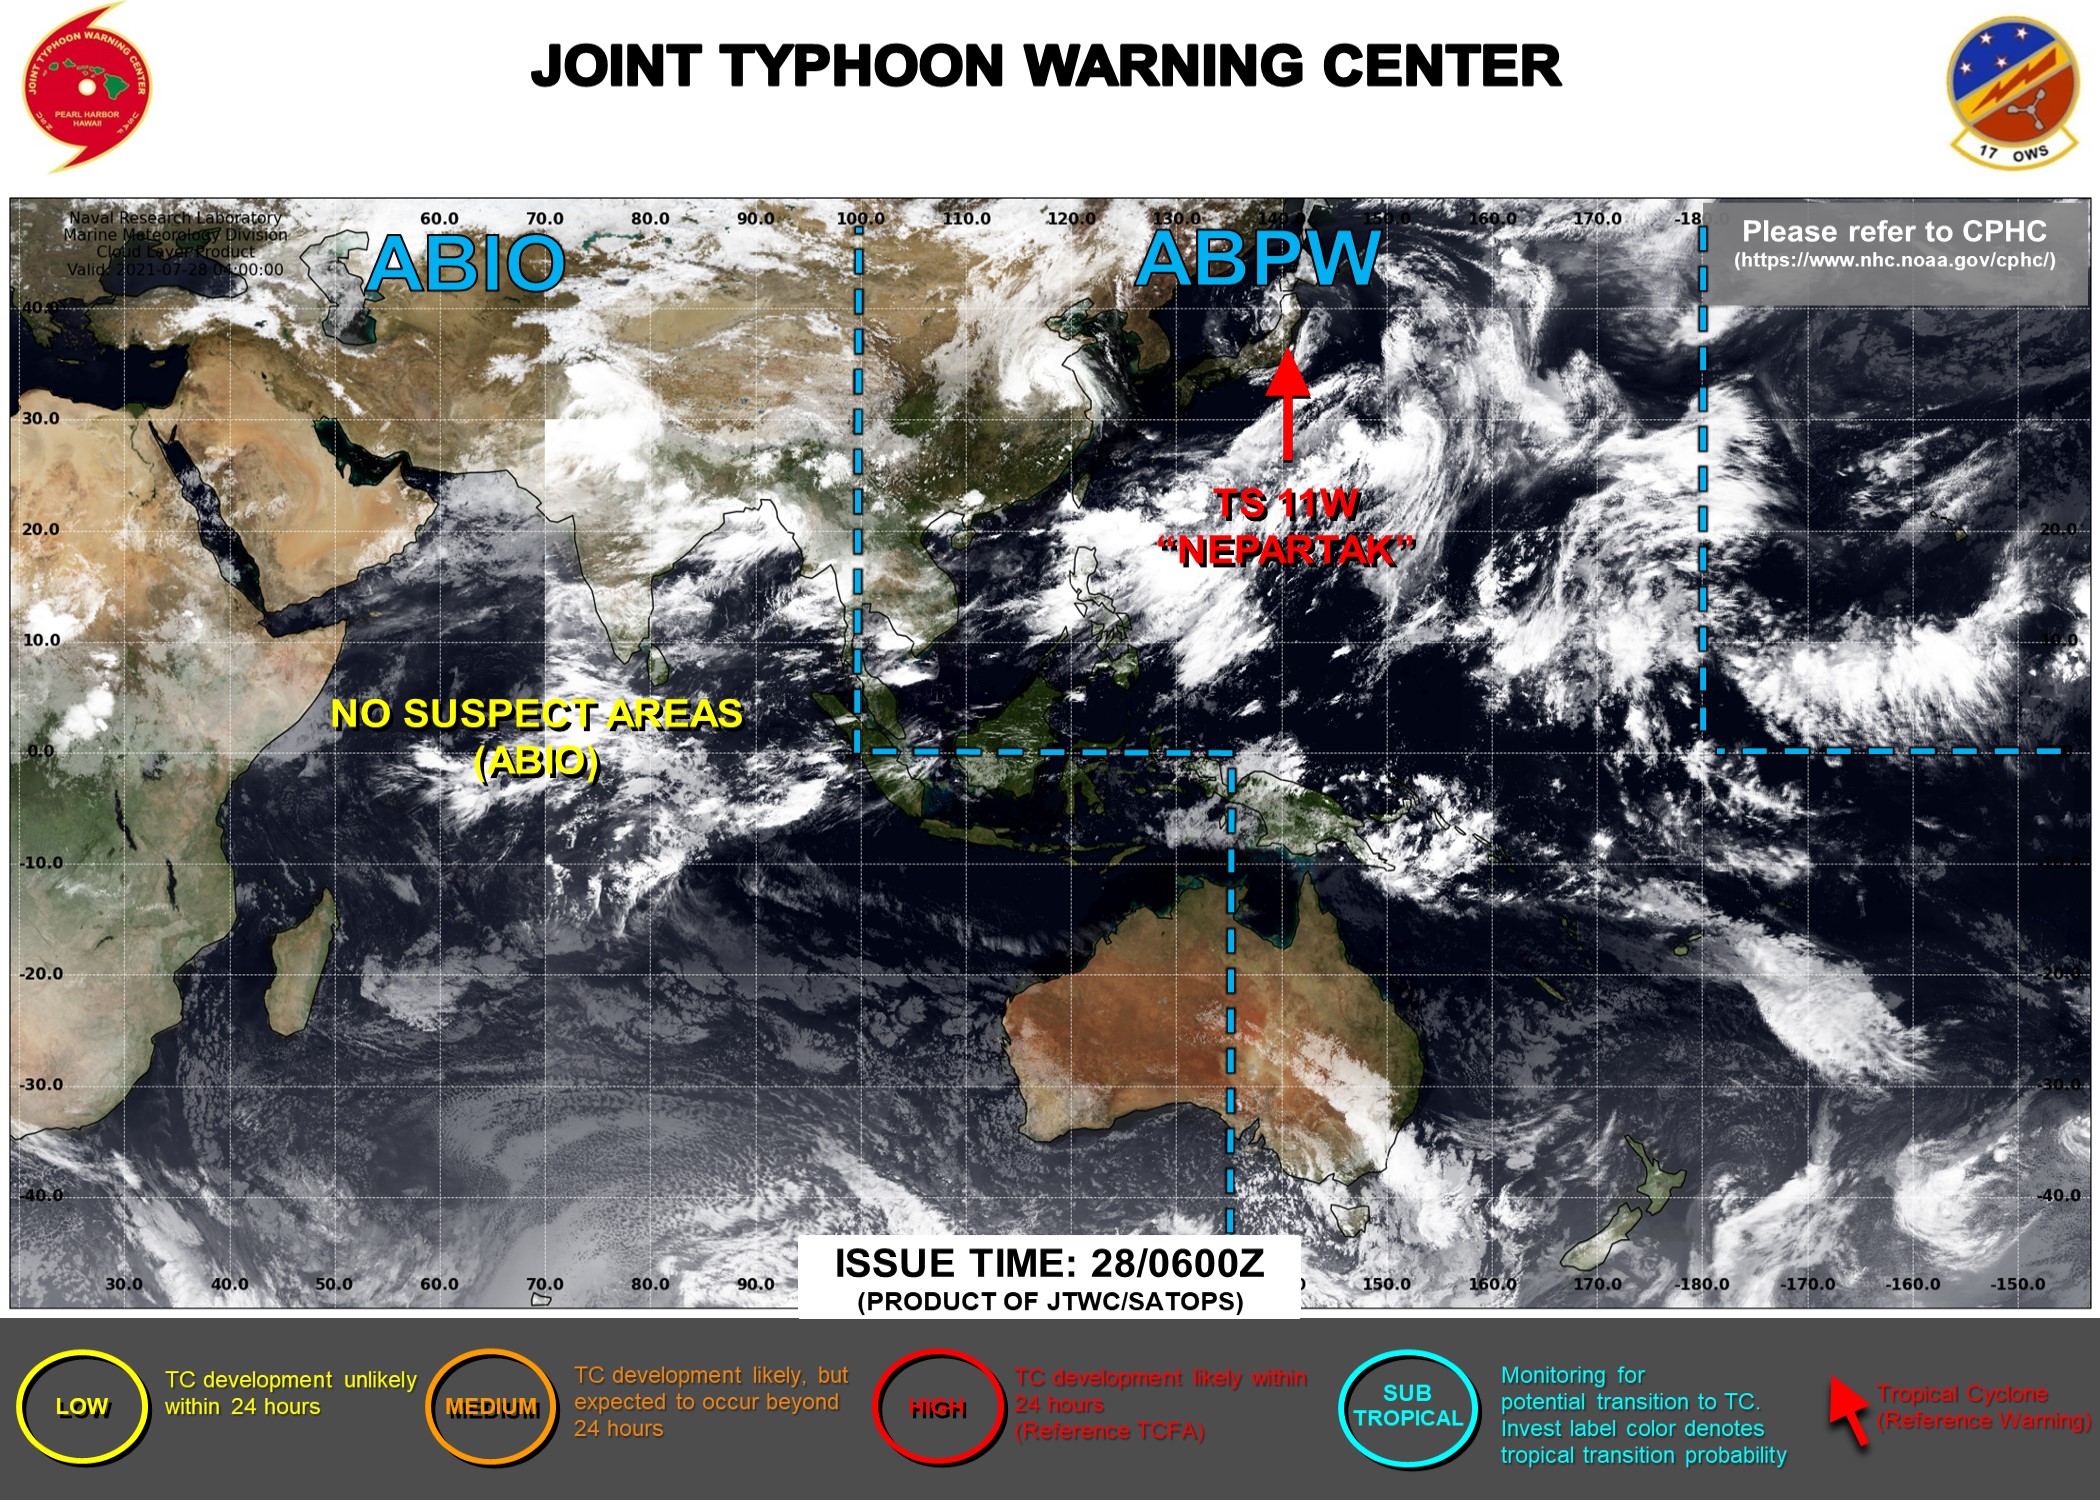 JTWC IS ISSUING 6HOURLY WARNINGS ON 11W. 3HOURLY SATELLITE BULLETINS ARE ISSUED ON 11W AND ON 09W(OVER-LAND).